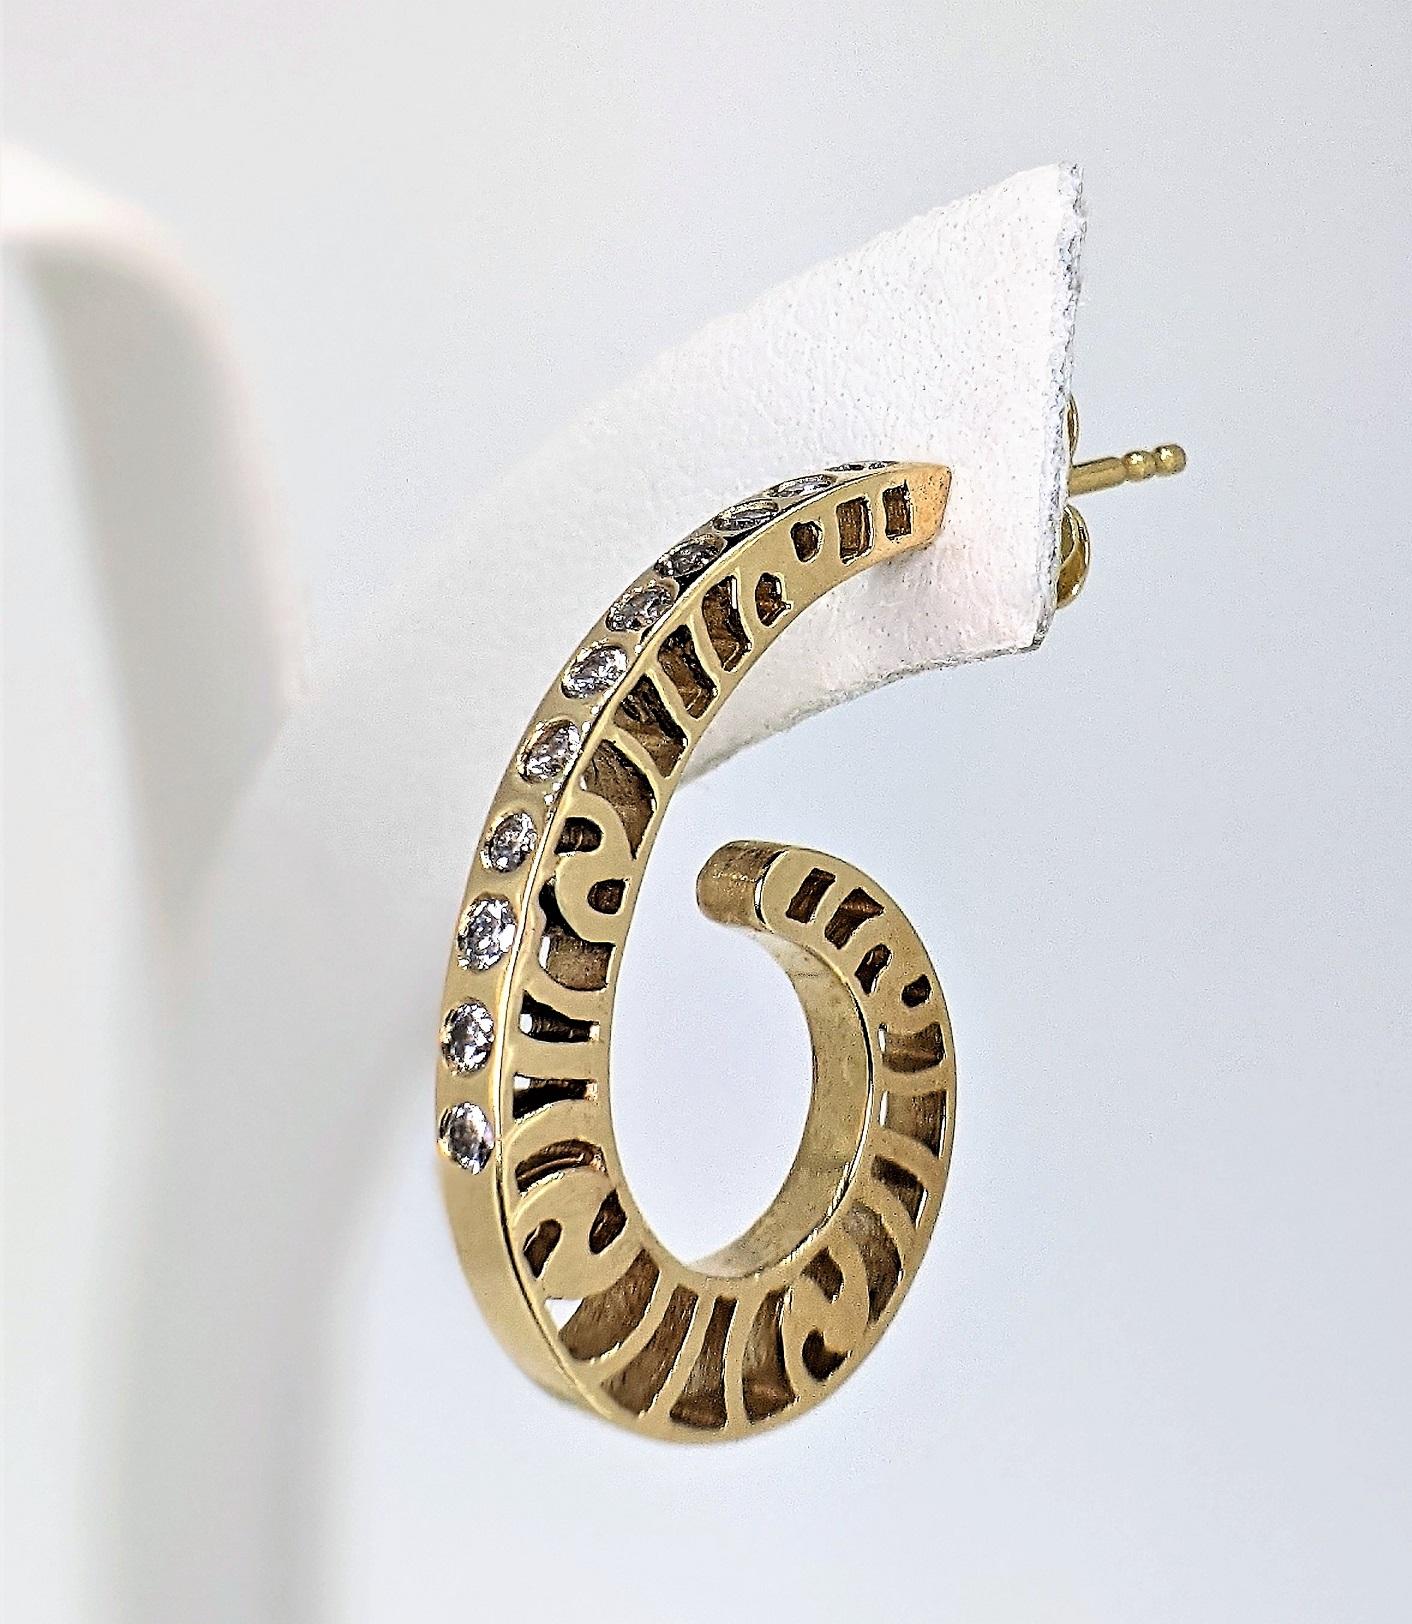 A great pair of hoop earrings takes you everywhere! And these  teardrop shaped hoops are just the right size and shape. The earrings are 14k yellow, with a high polish and each has 11 diamonds flush-set on it's spine. The sides are pierced with the